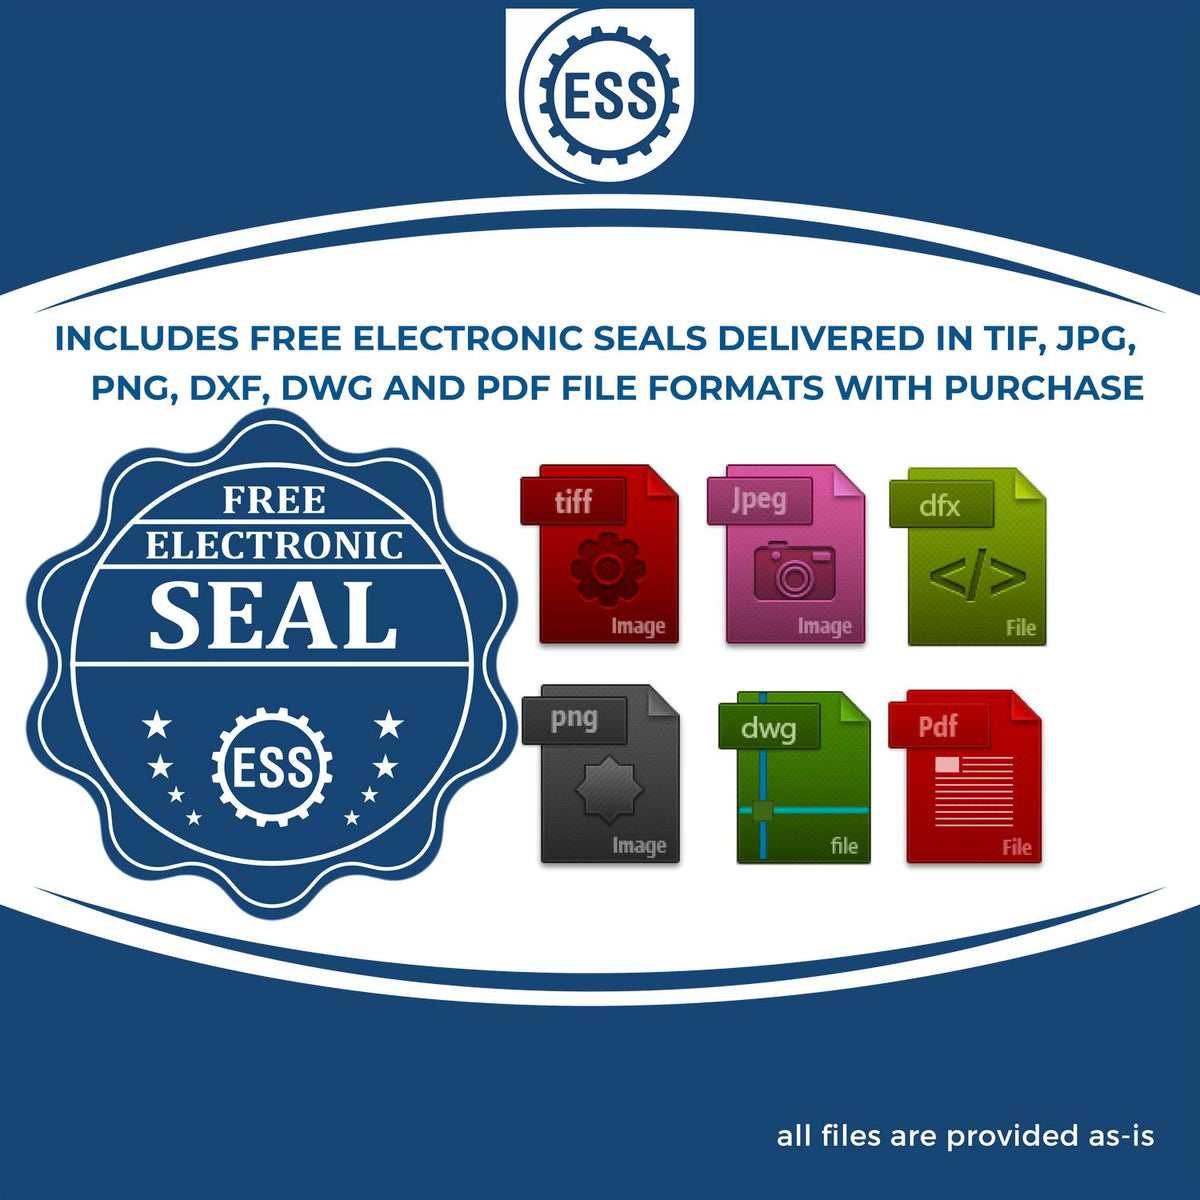 An infographic for the free electronic seal for the Slim Pre-Inked Mississippi Land Surveyor Seal Stamp illustrating the different file type icons such as DXF, DWG, TIF, JPG and PNG.